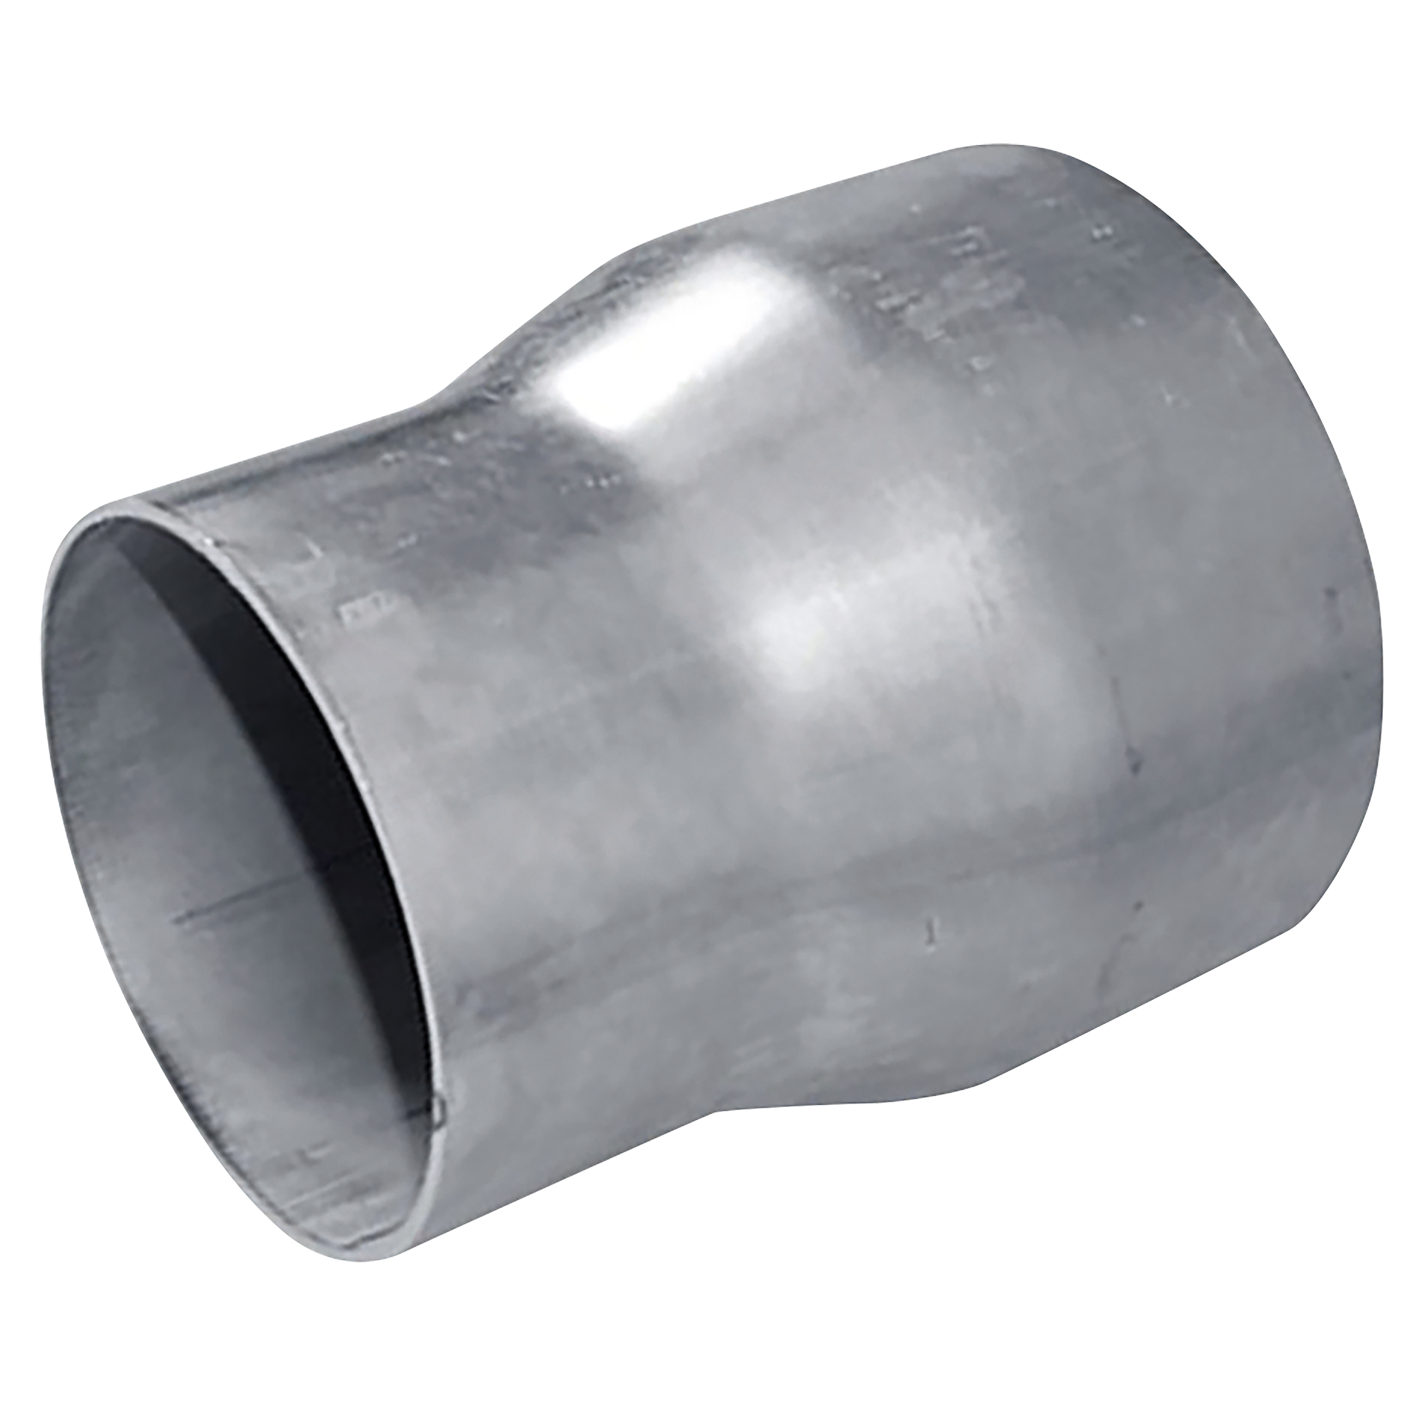 STEEL REDUCING CONE 152MM-127MM OD